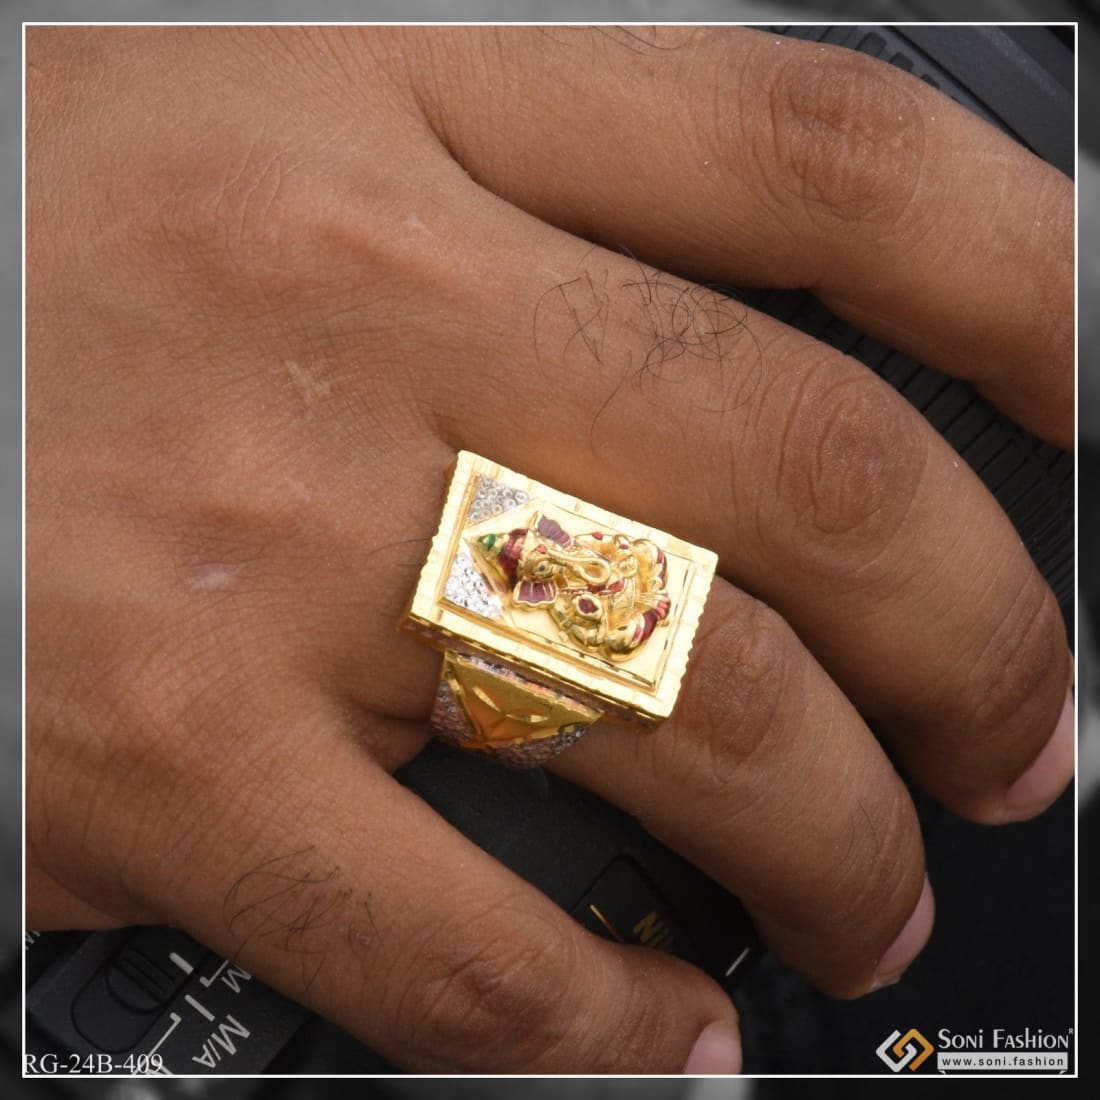 Home Lord Ganesha 22KT Gold Ring | Mens gold rings, Gold ring designs, Gold  jewellery design necklaces